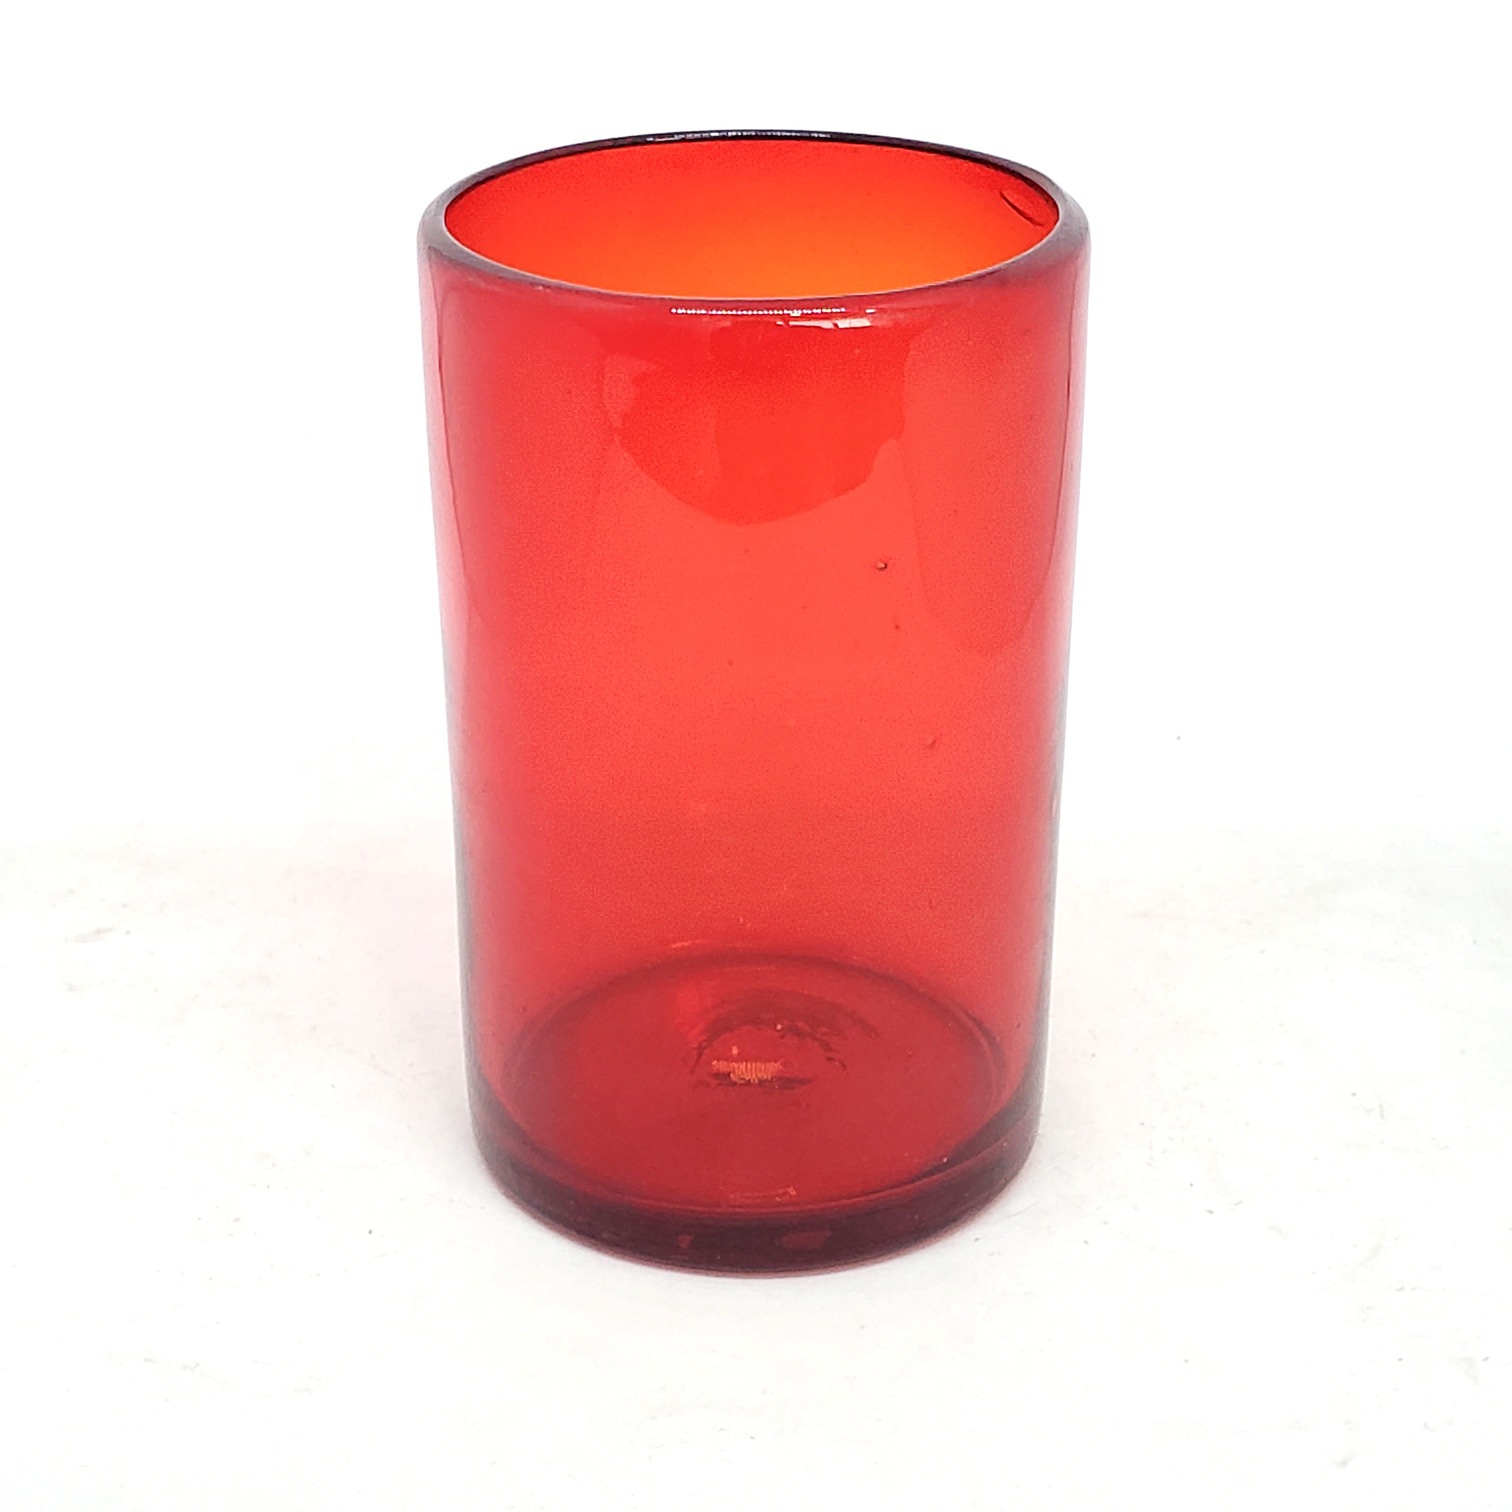 MEXICAN GLASSWARE / Solid Ruby Red 14 oz Drinking Glasses (set of 6)